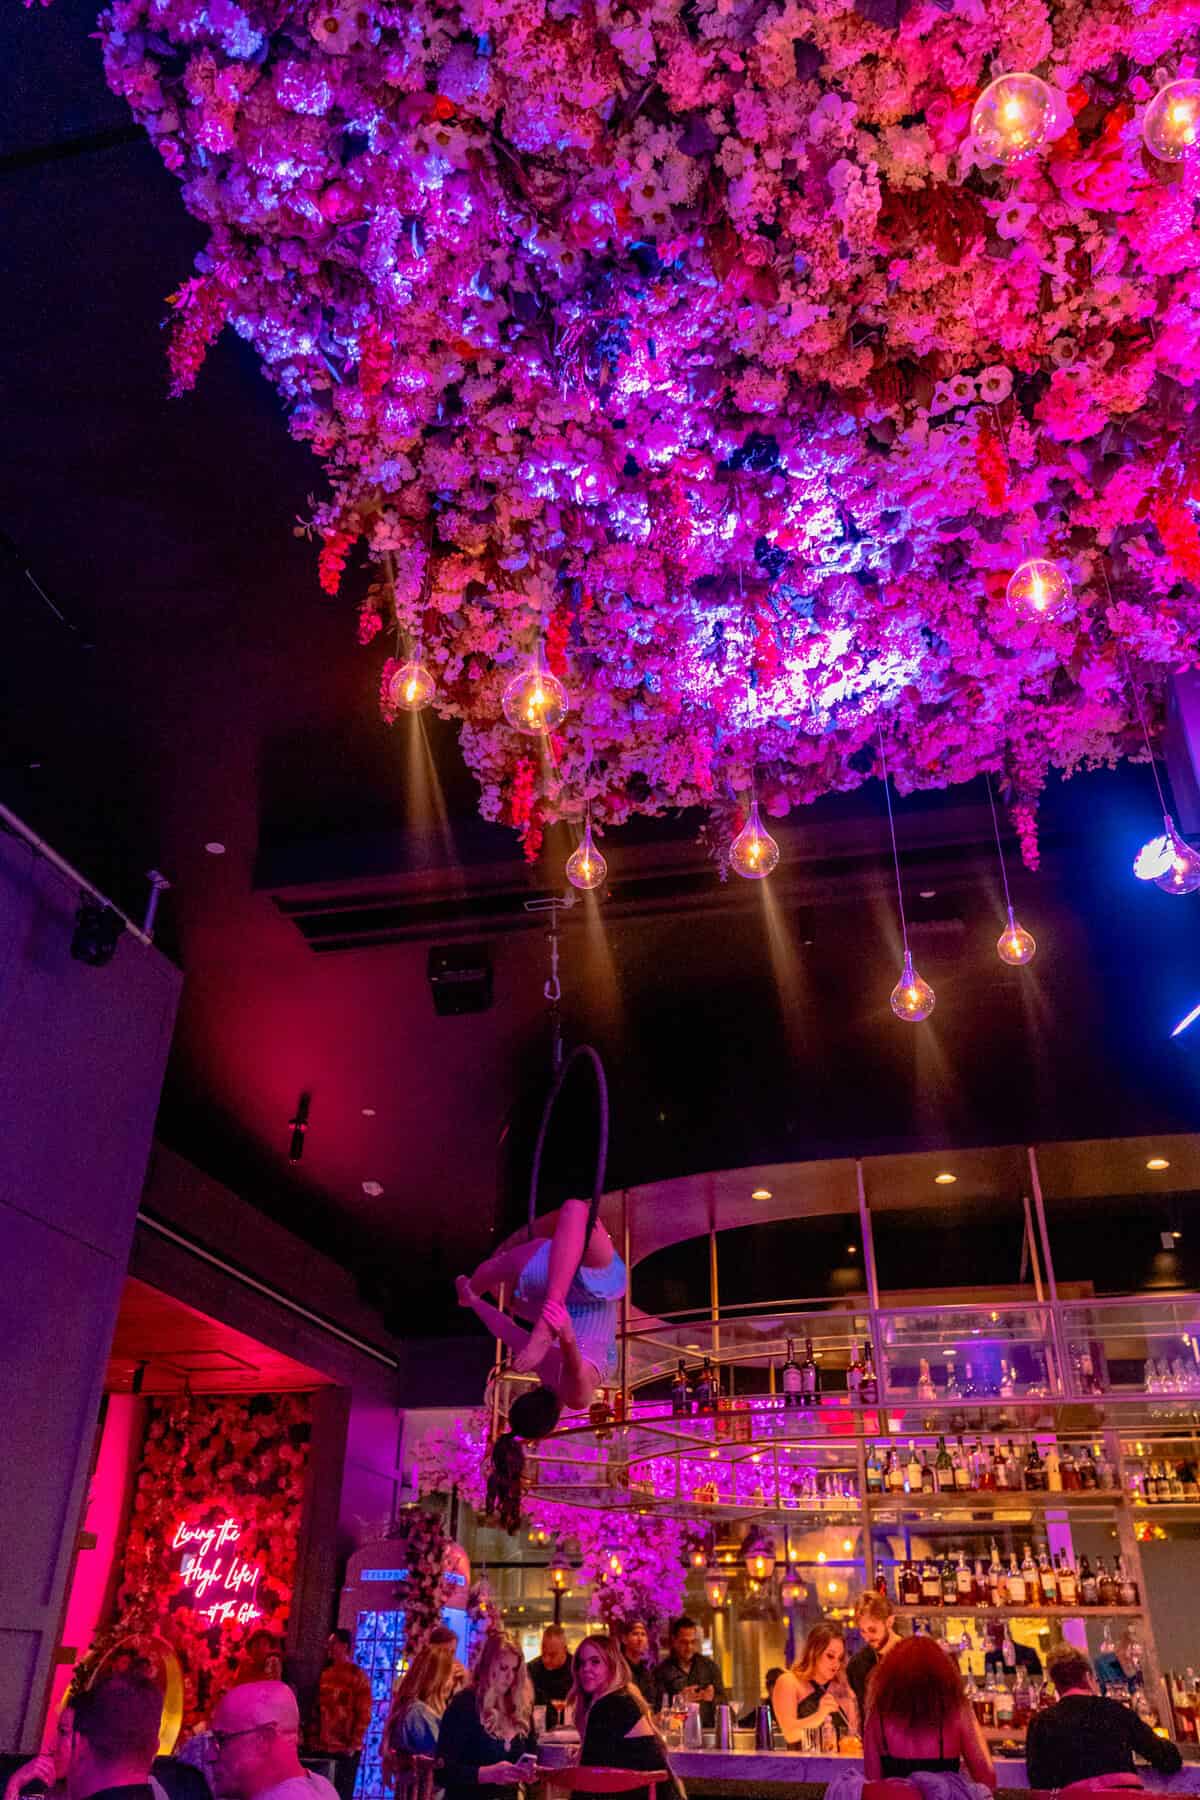 A vibrant nightclub with a ceiling covered in pink and white flowers